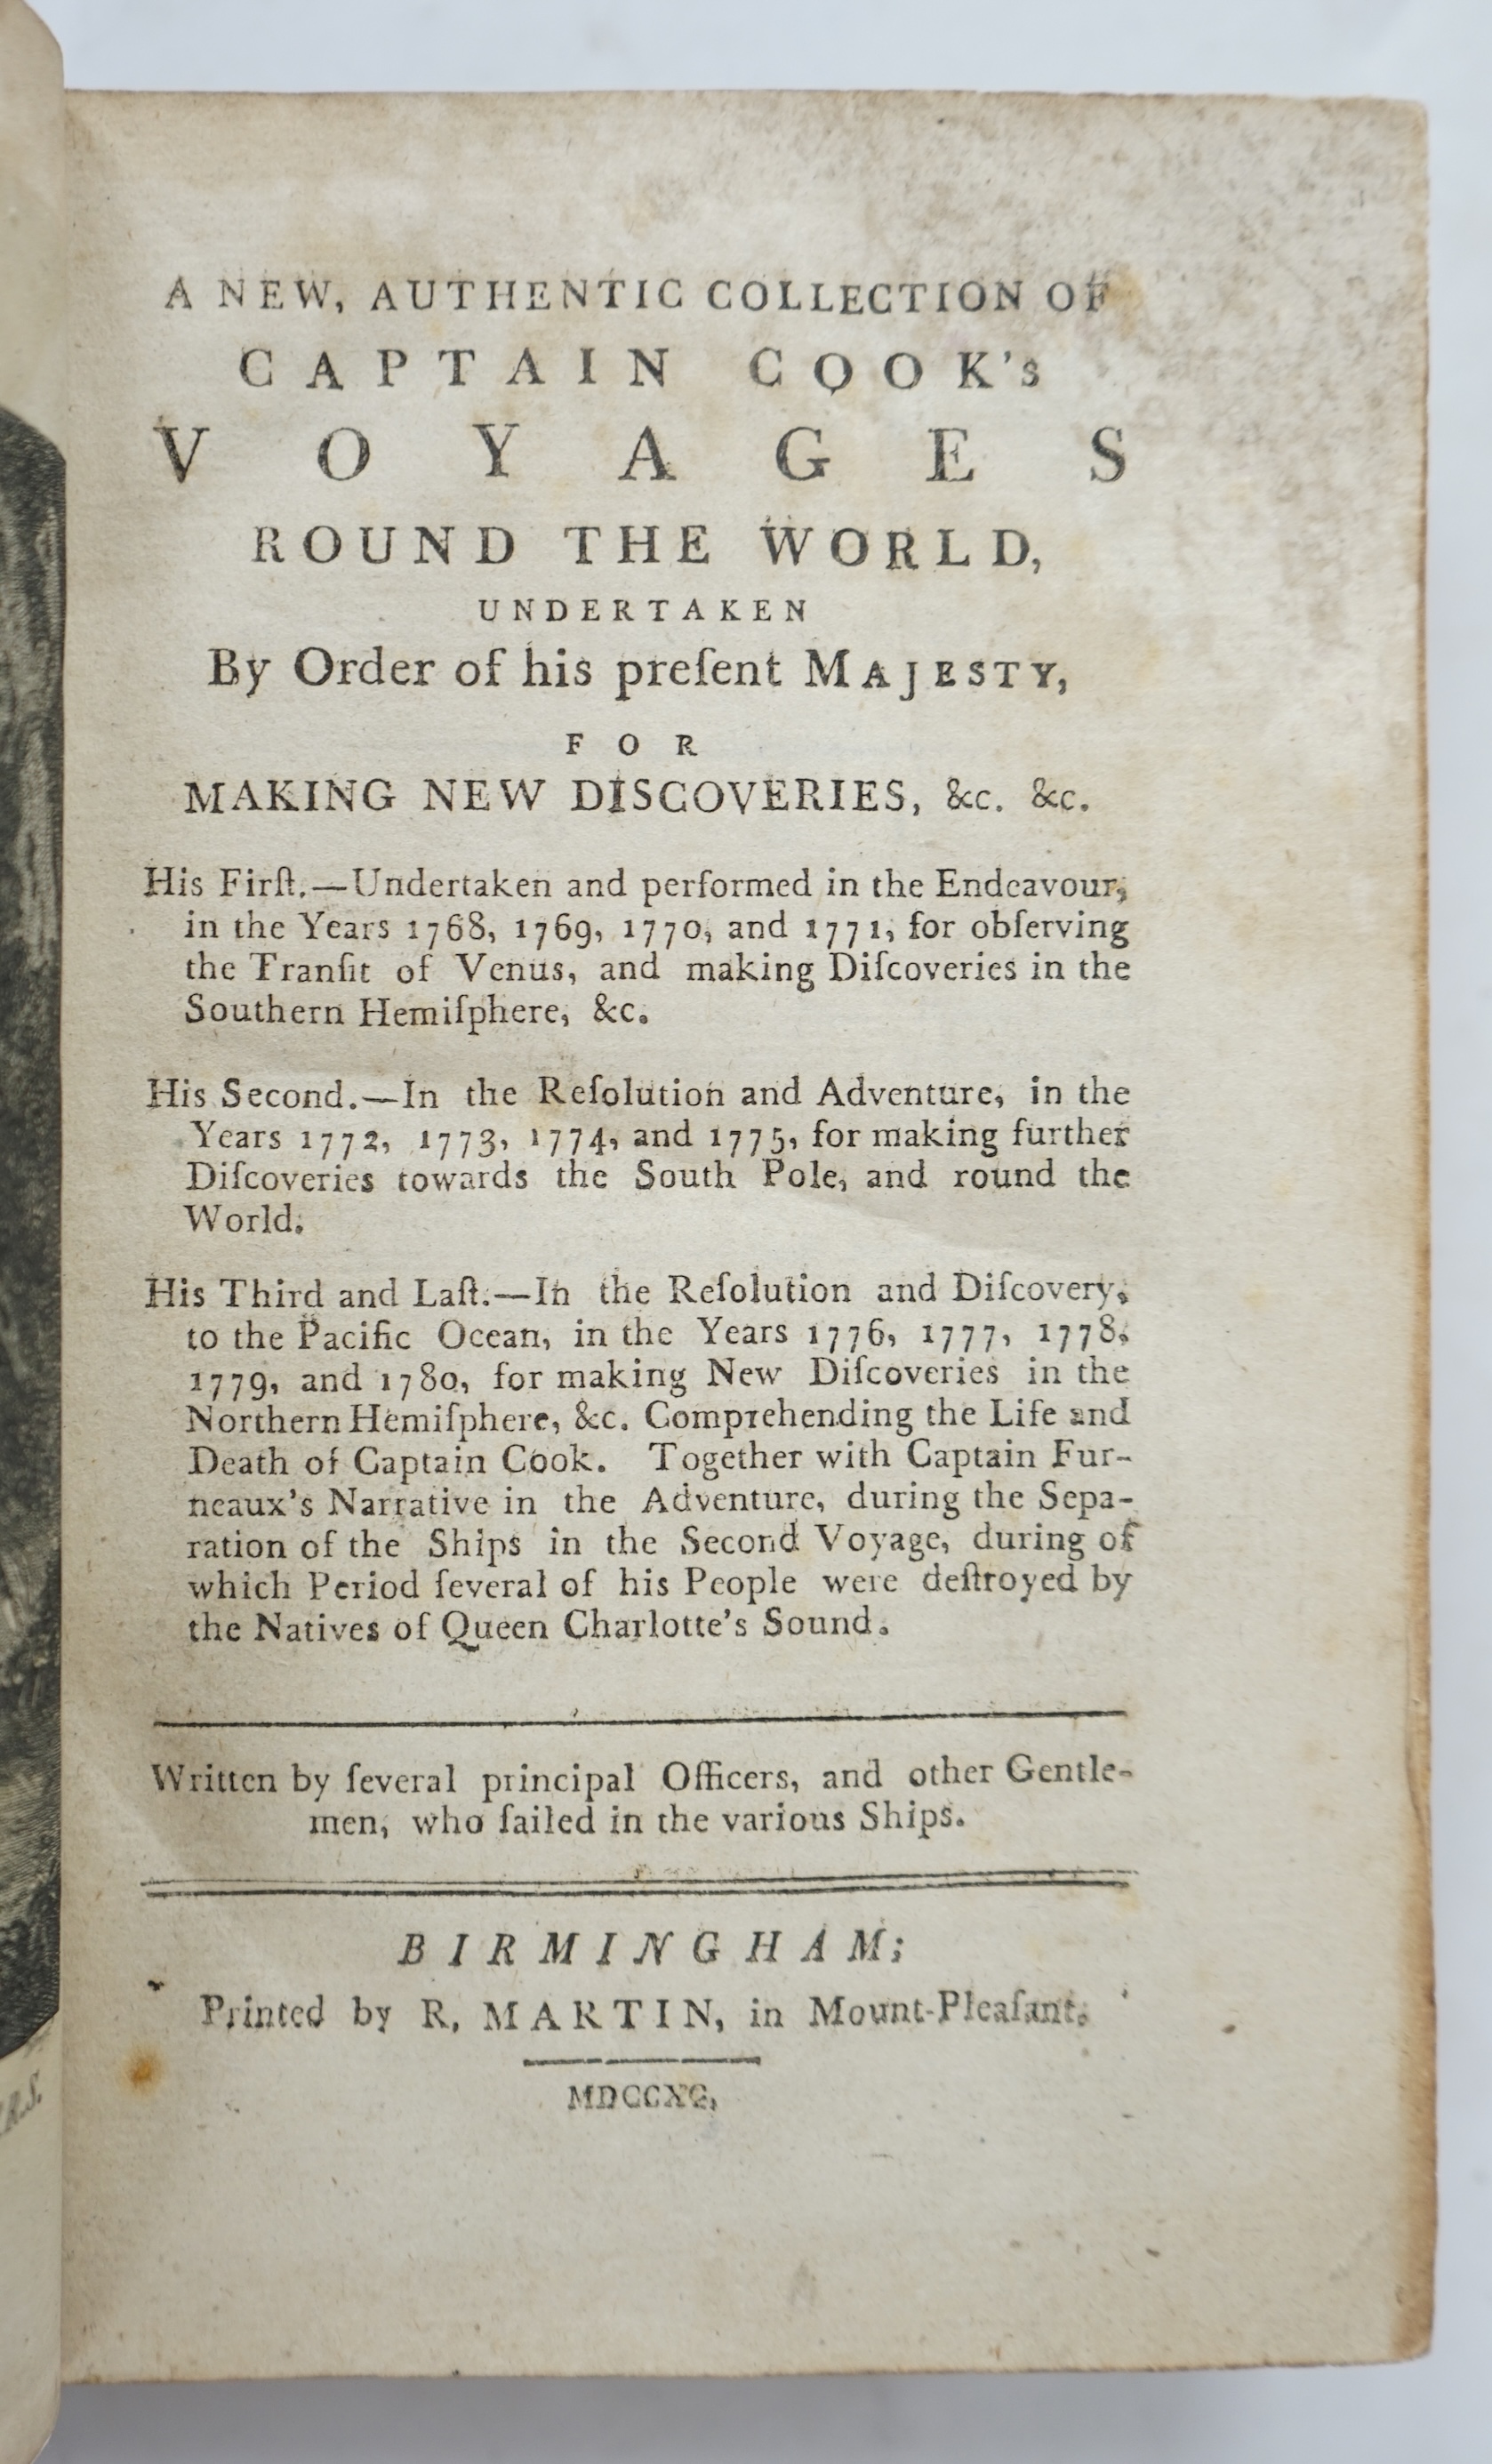 Cook, Captain James - A New, Authentic Collection of Captain Cook's Voyages Round the World, Undertaken by Order of his present Majesty, for Making New Discoveries,... Birmingham: R. Martin, 1790. 618 pp. Frontis. portra